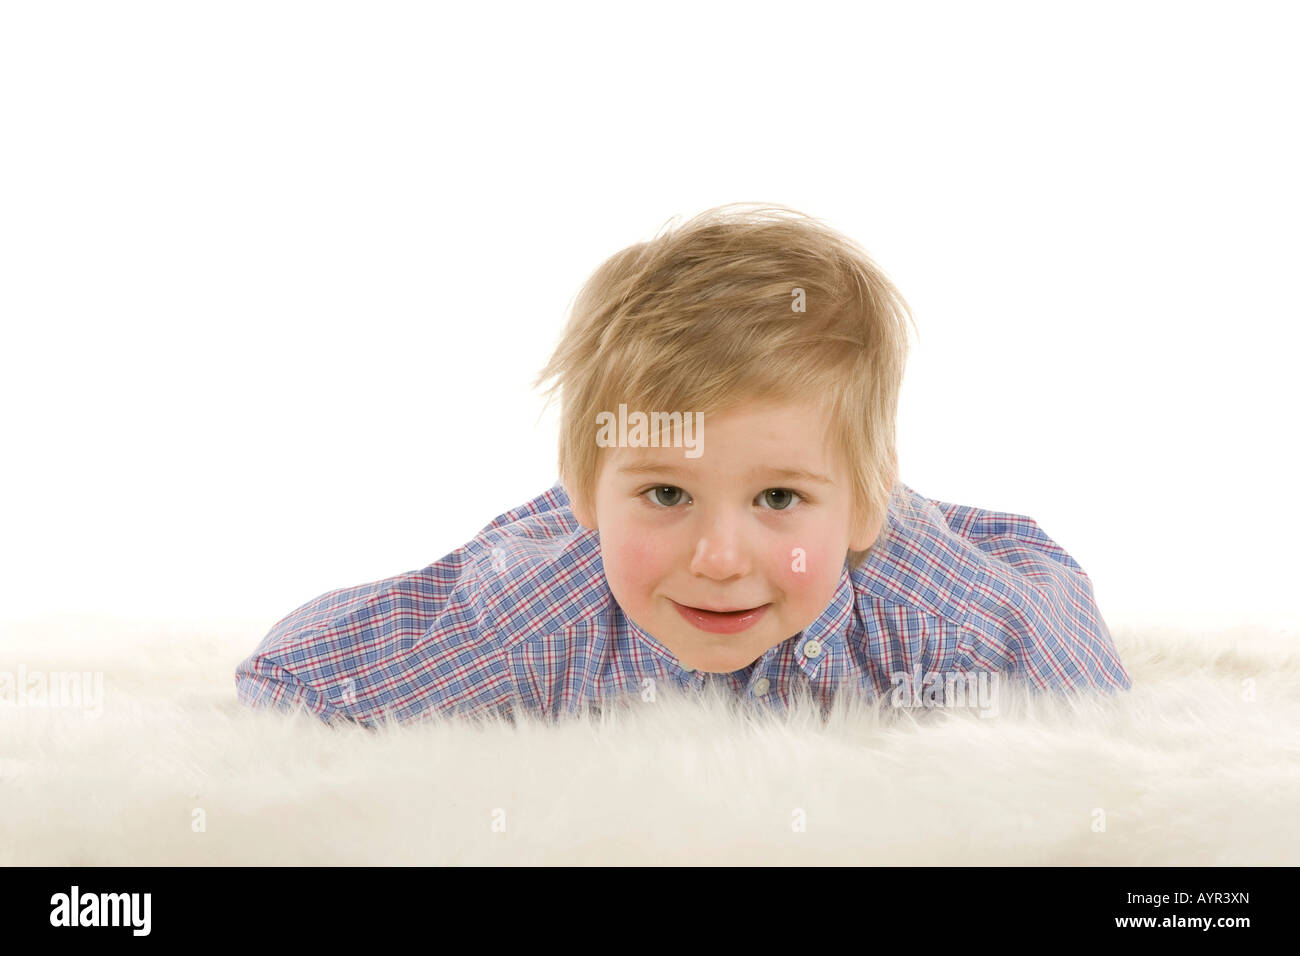 Two-year-old boy laying on fuzzy rug Stock Photo